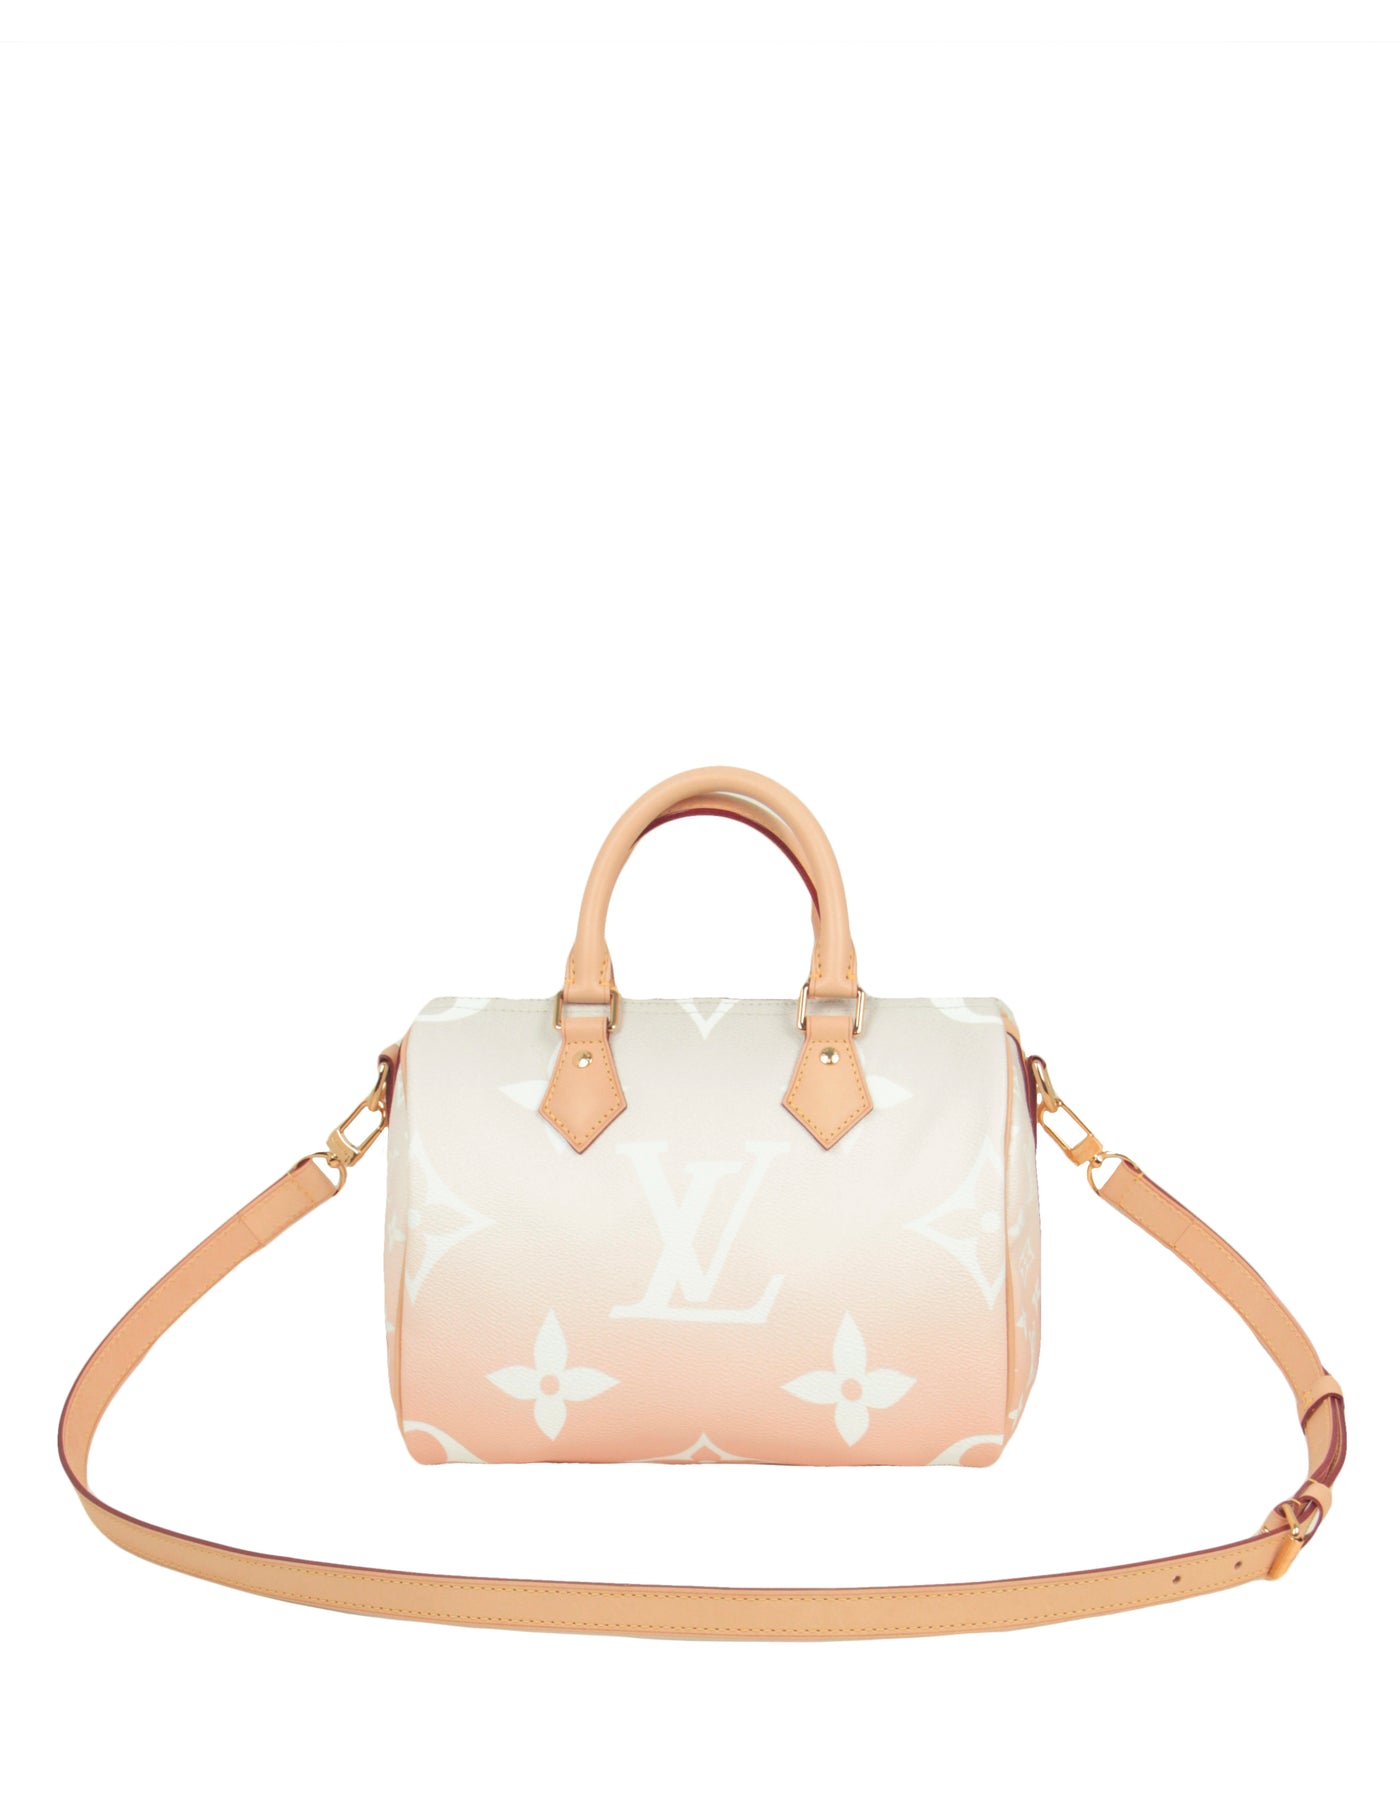 Louis Vuitton Limited Edition Summer by the Pool Speedy Bandoulière 25 in  Brume Giant Monogram - SOLD